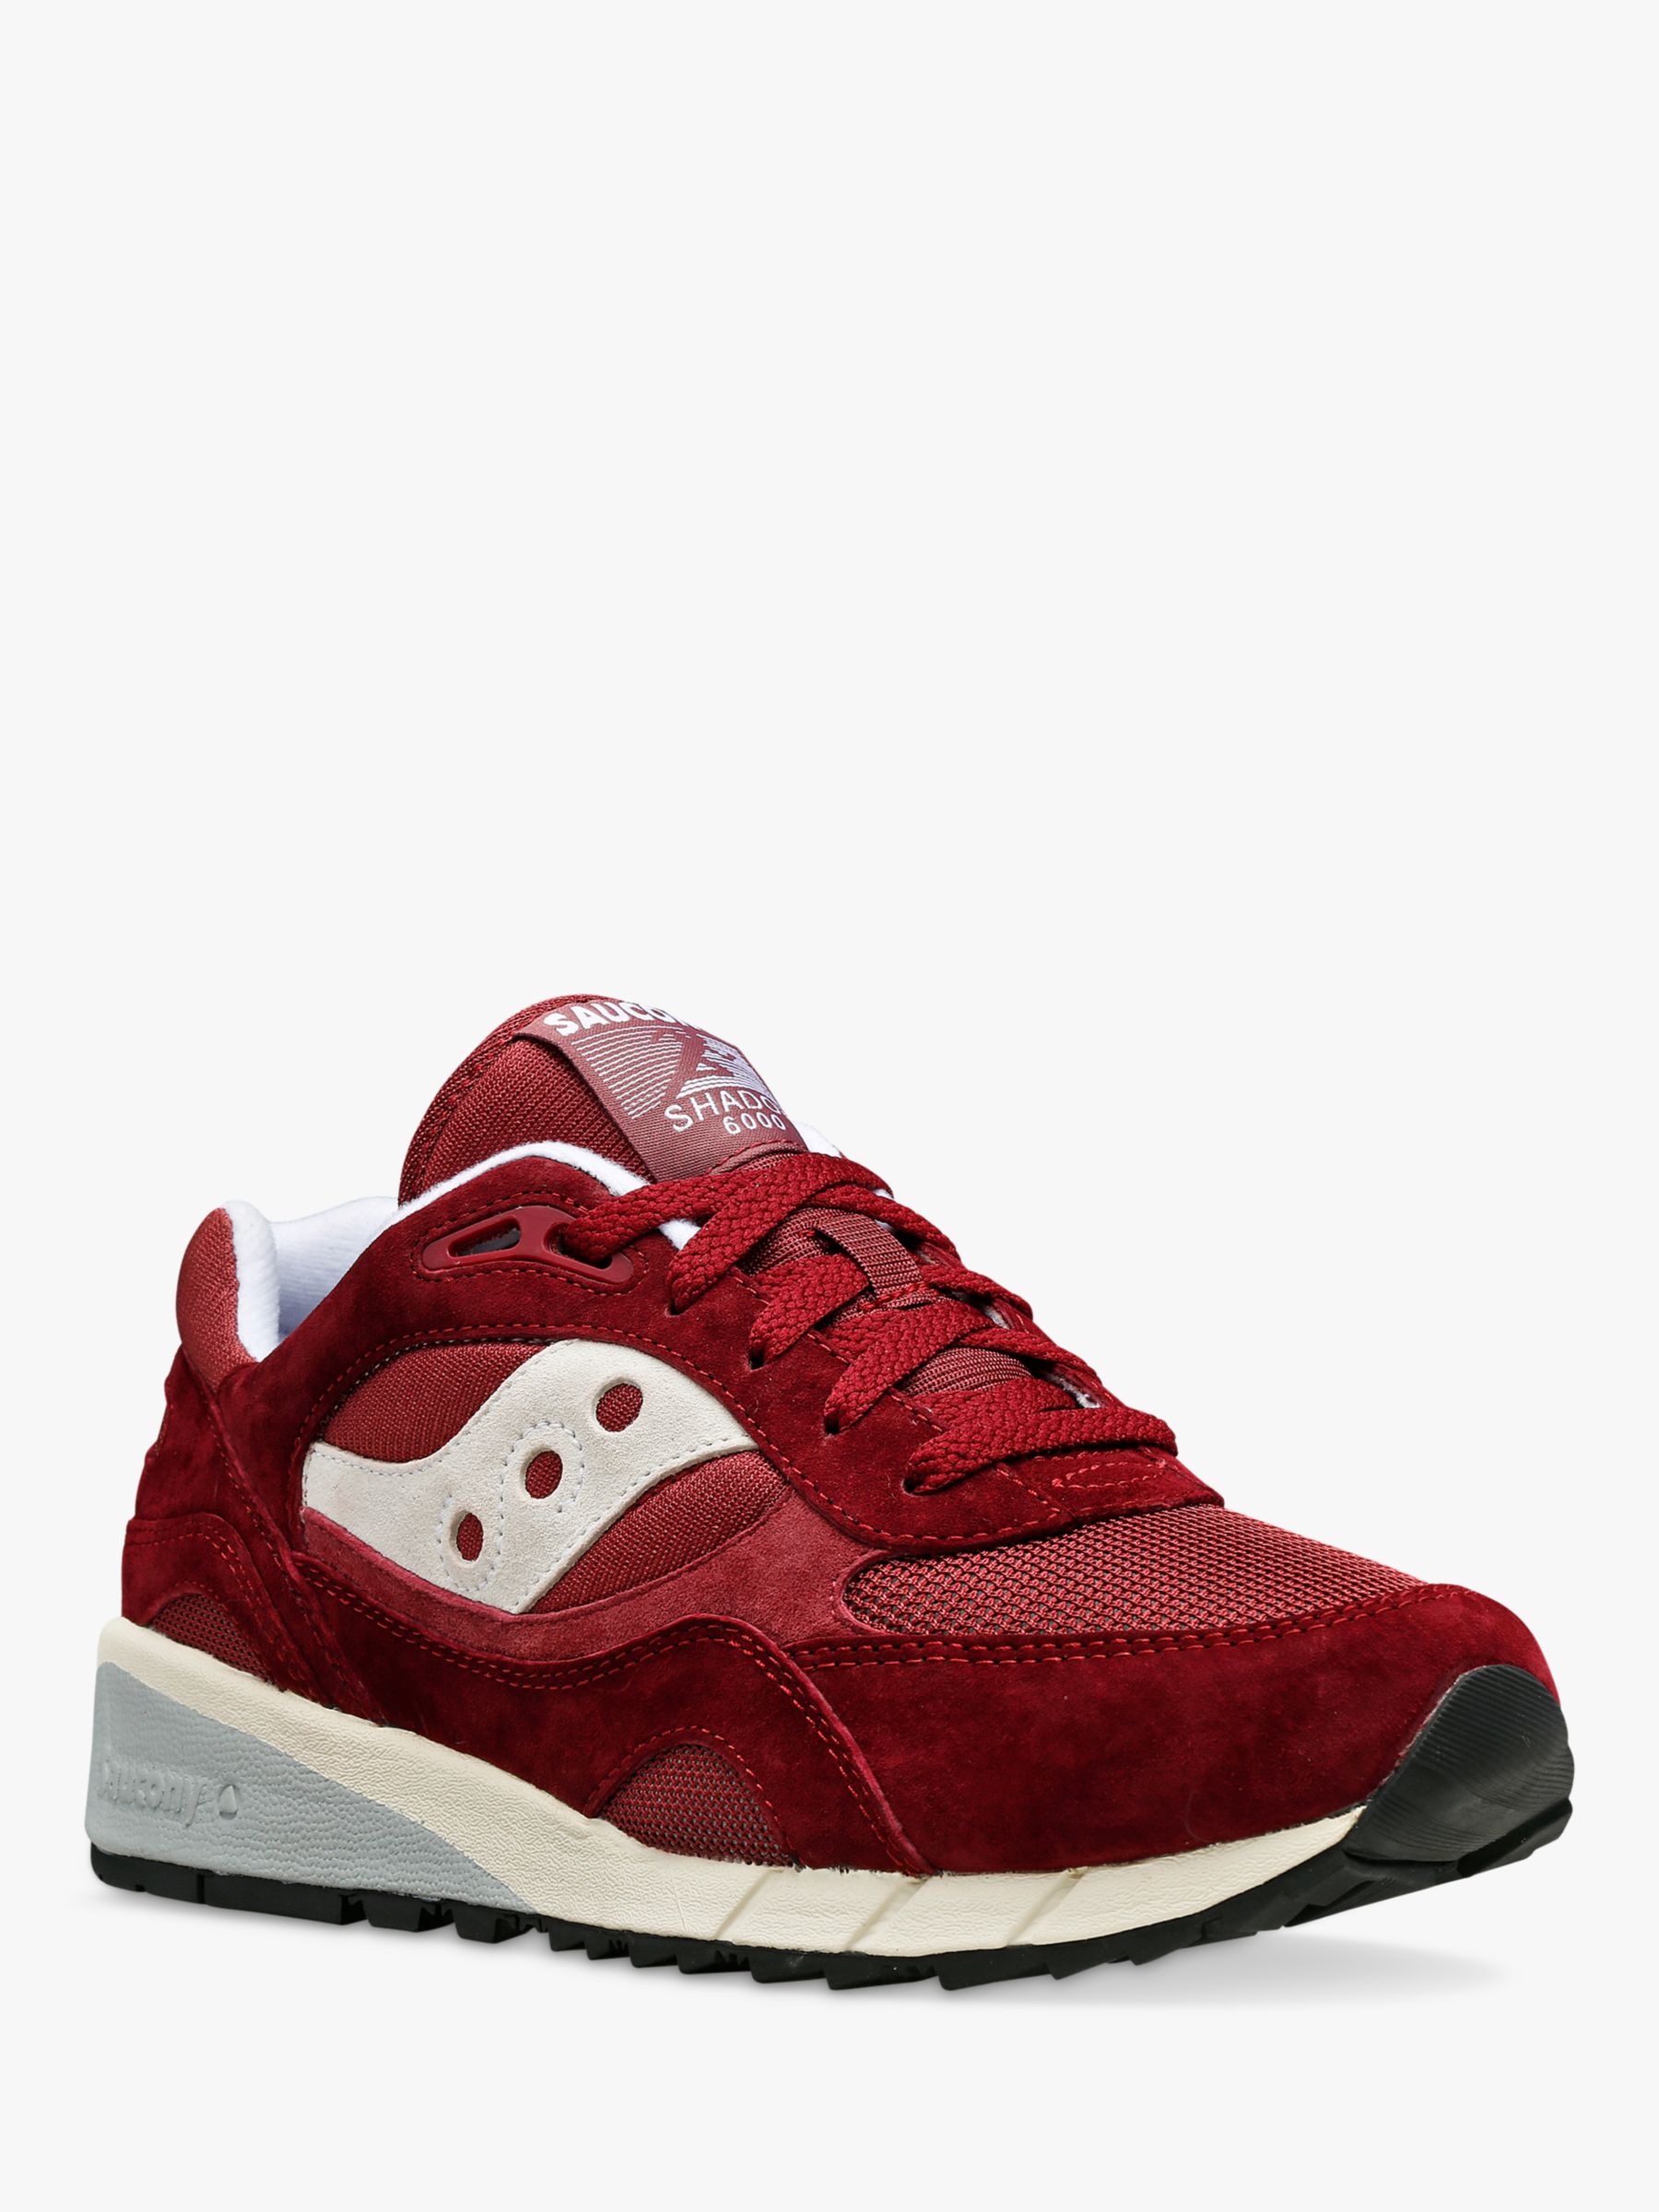 Saucony Shadow 6000 Lace Up Trainers, Burgundy, 7